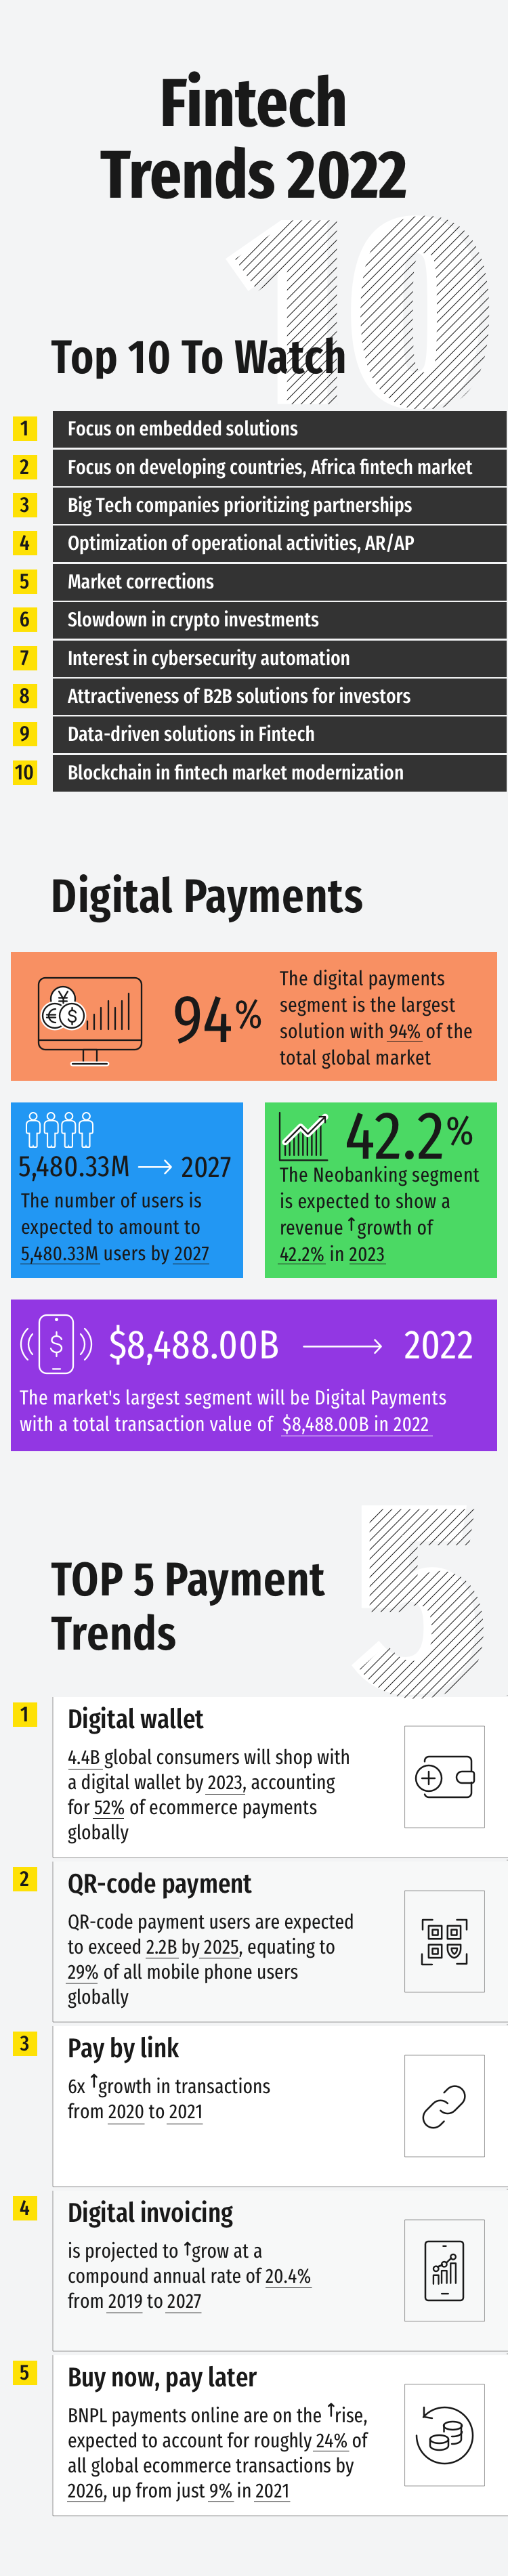 Infographic: Fintech Overview & Trends 2022 - 2022 - 19